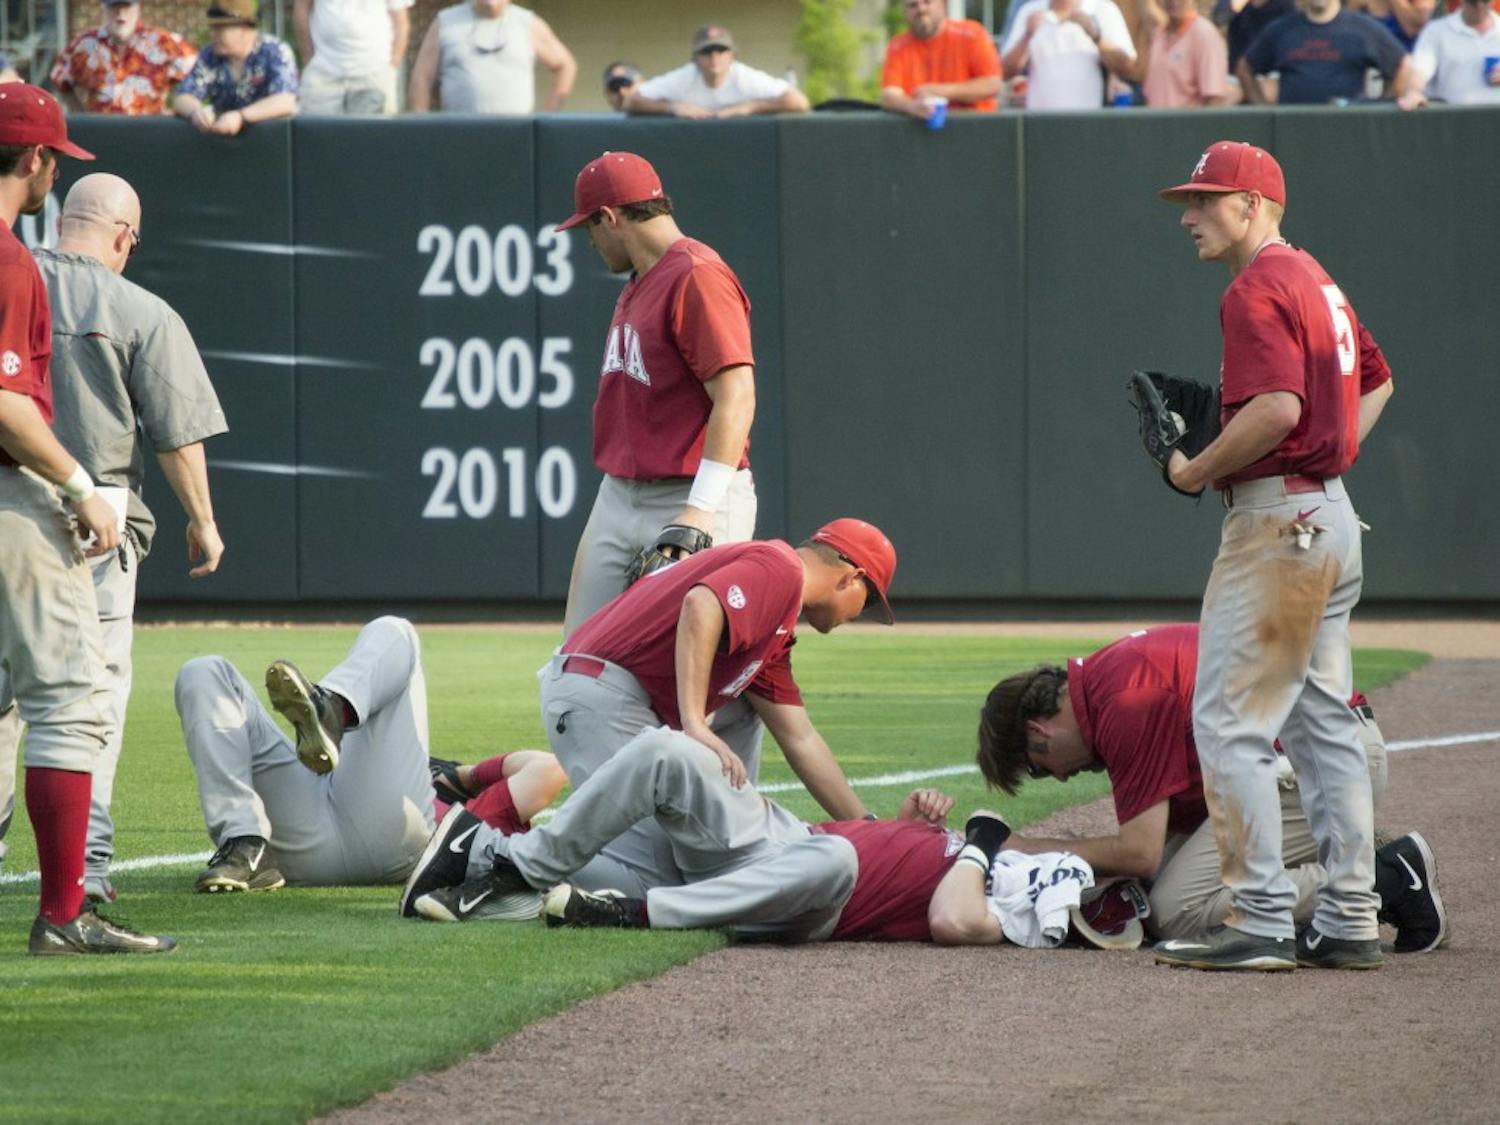 Alabama players Chance Vincent (middle, ground) and Casey Hughston (left, ground) receive medical attention after colliding in the outfield. (Jordan Hays | Copy Editor)